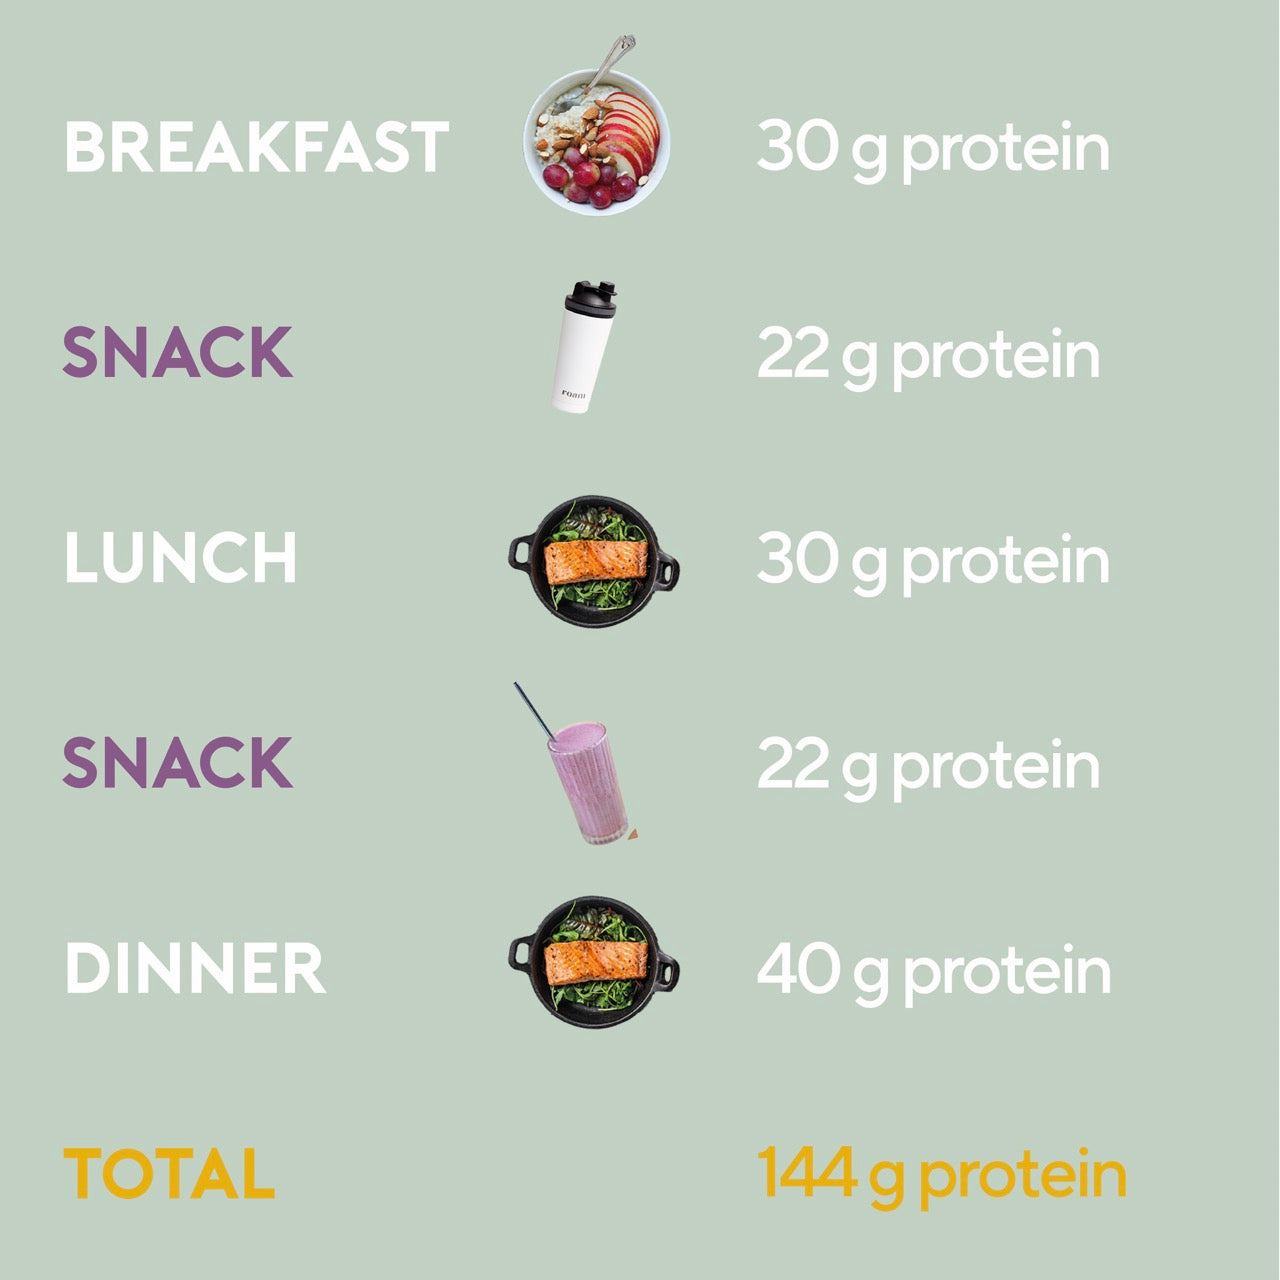 Example of Distribution of Protein Rich Meals Across A Day